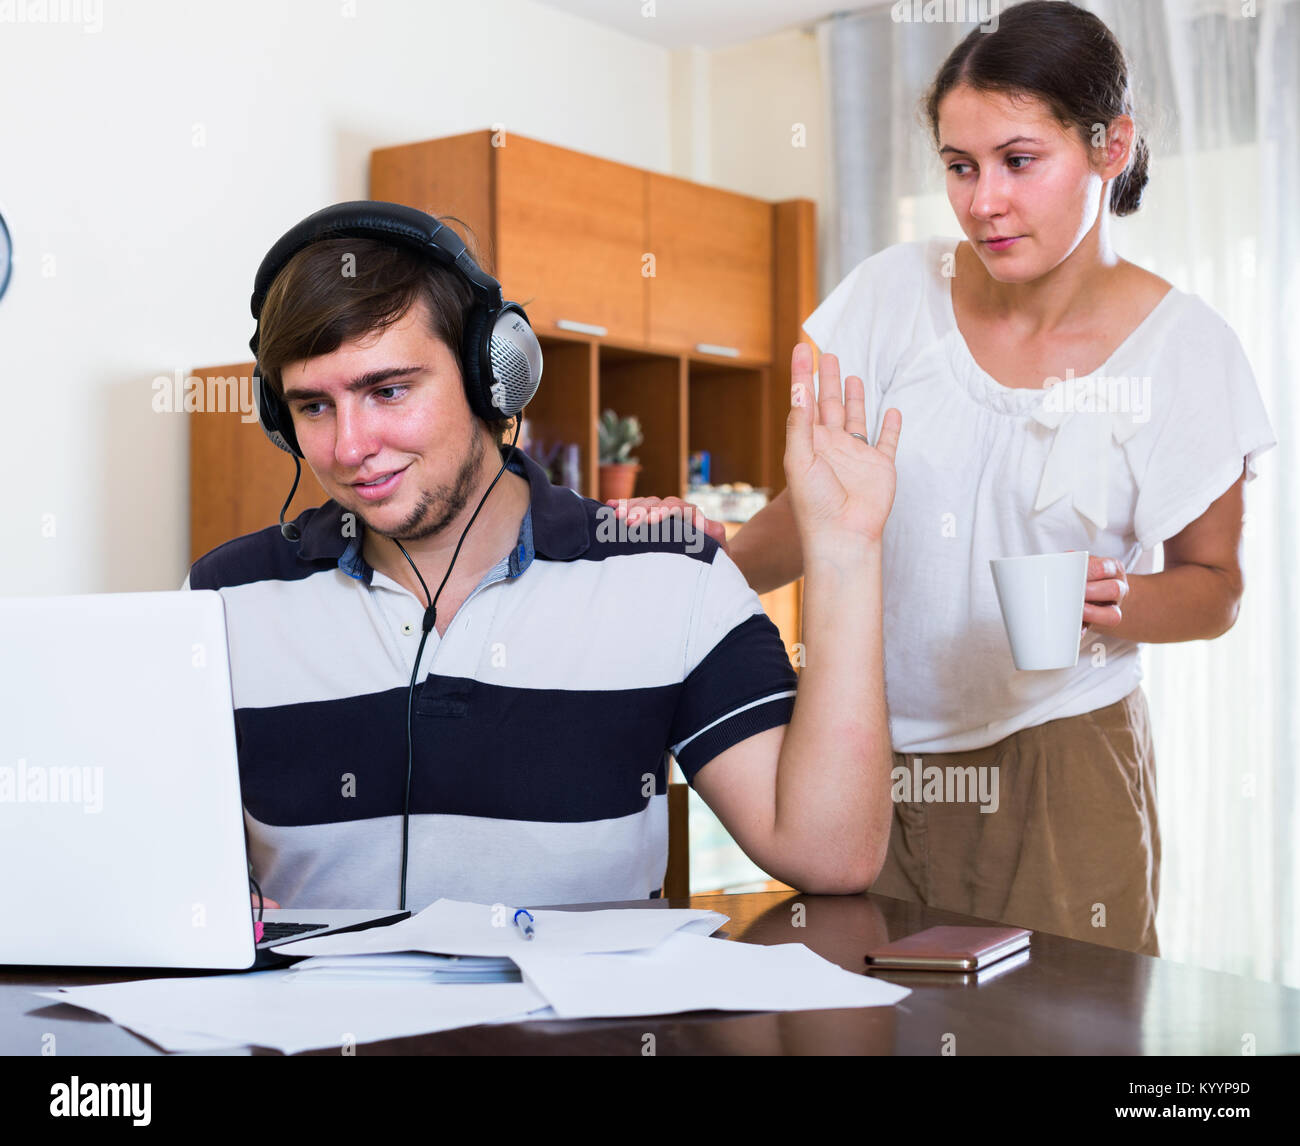 spouse and sad american  person with internet addiction at home. focus on man Stock Photo